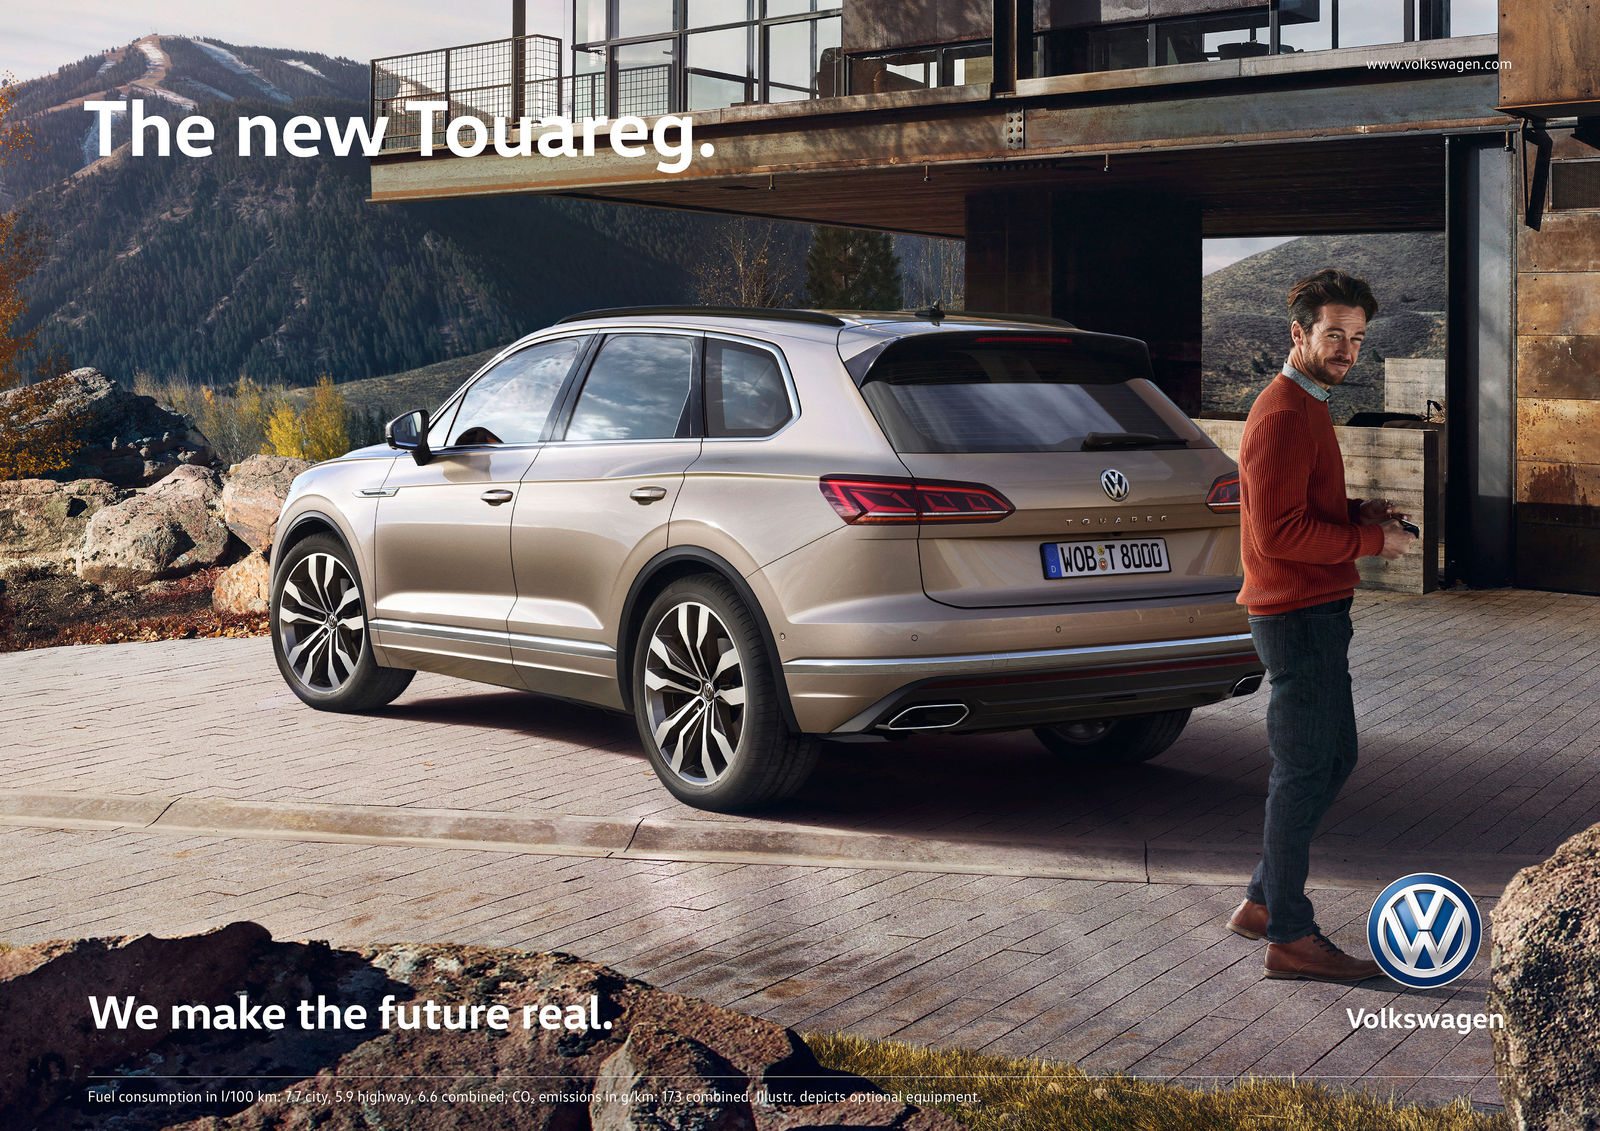 Volkswagen launches European marketing campaign for new Touareg